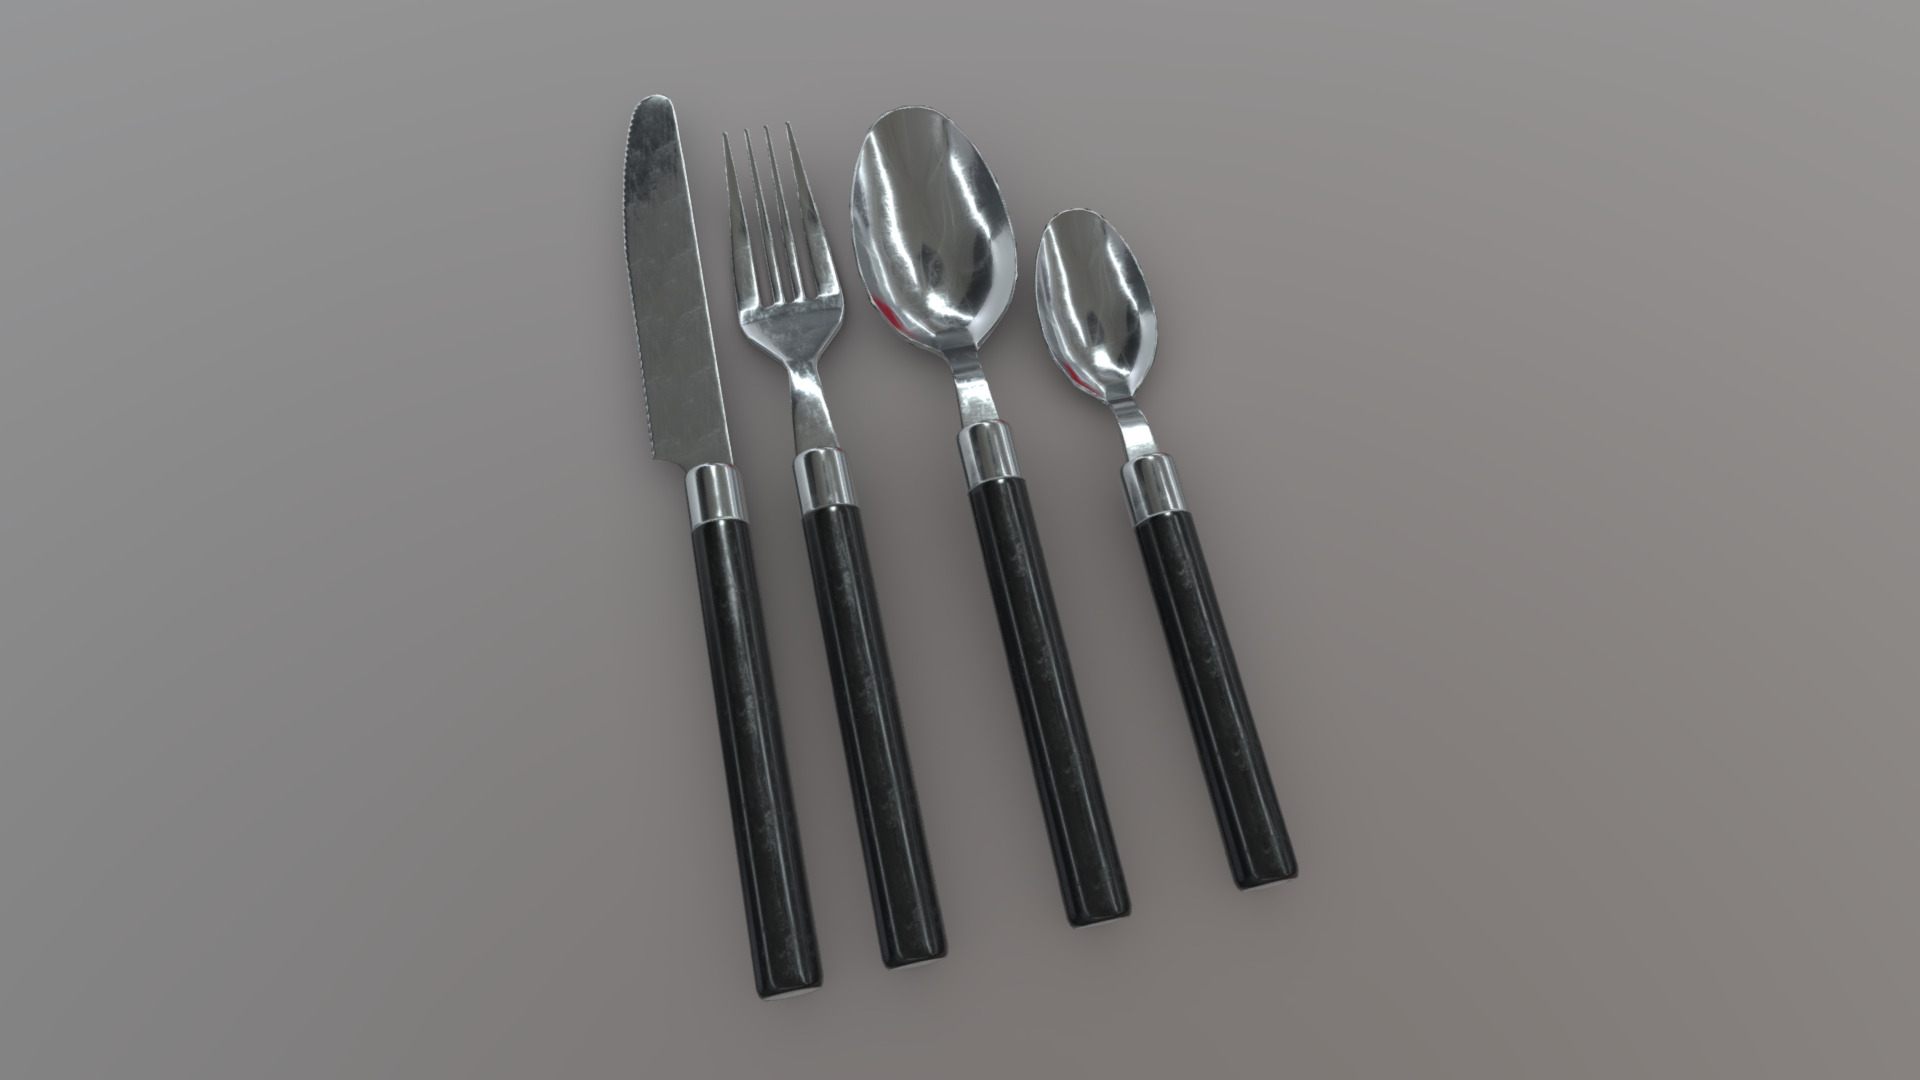 3D model Cutlery 2 - This is a 3D model of the Cutlery 2. The 3D model is about a group of silverware.